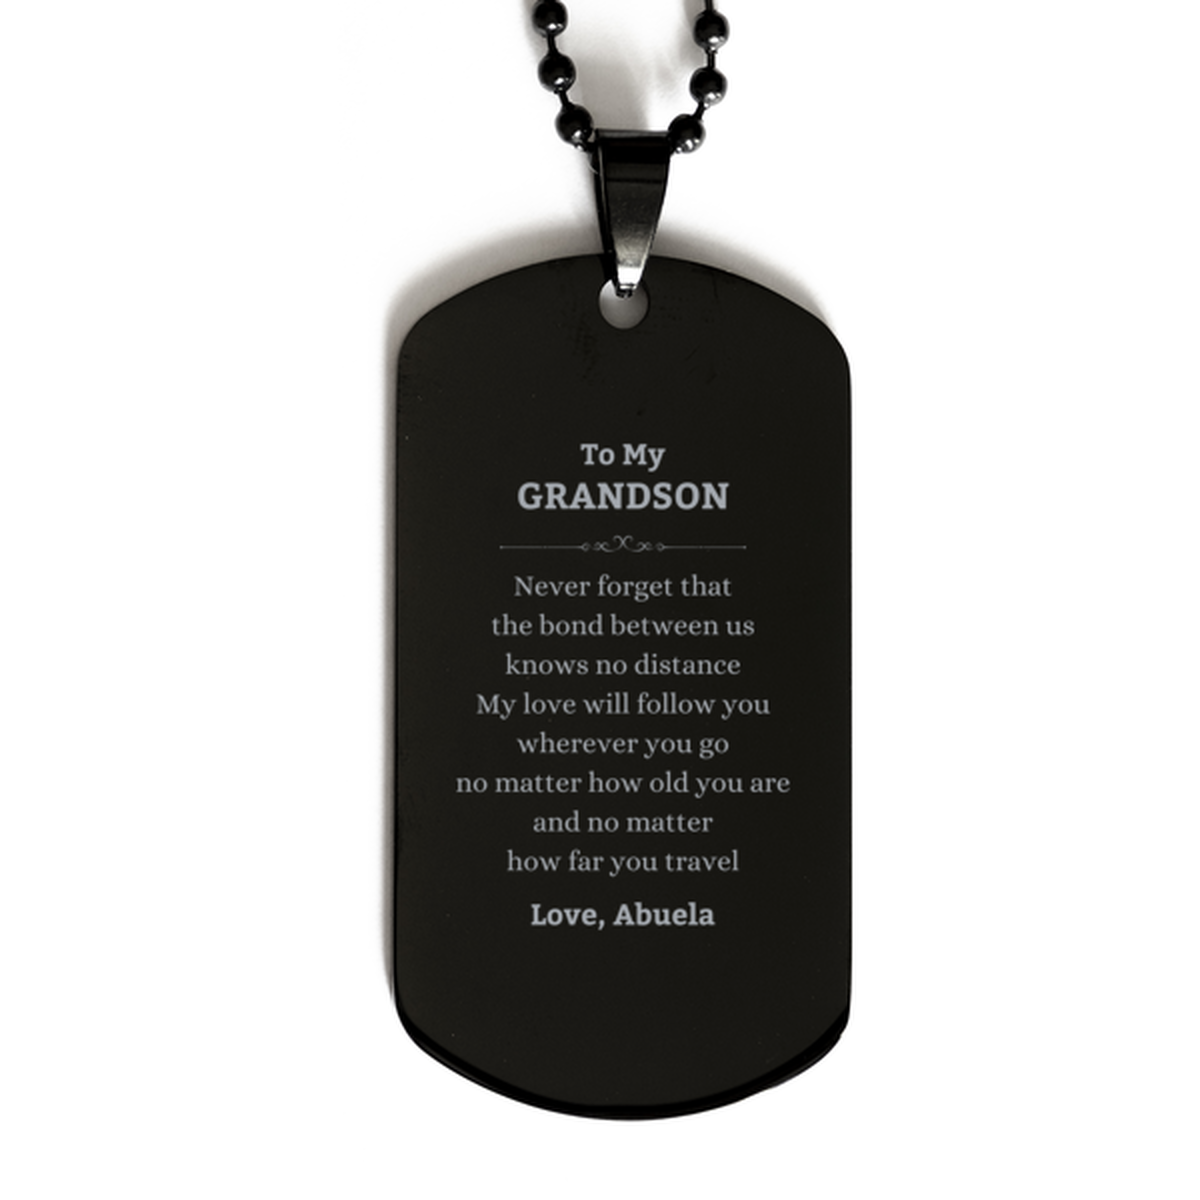 Grandson Birthday Gifts from Abuela, Adjustable Black Dog Tag for Grandson Christmas Graduation Unique Gifts Grandson Never forget that the bond between us knows no distance. Love, Abuela